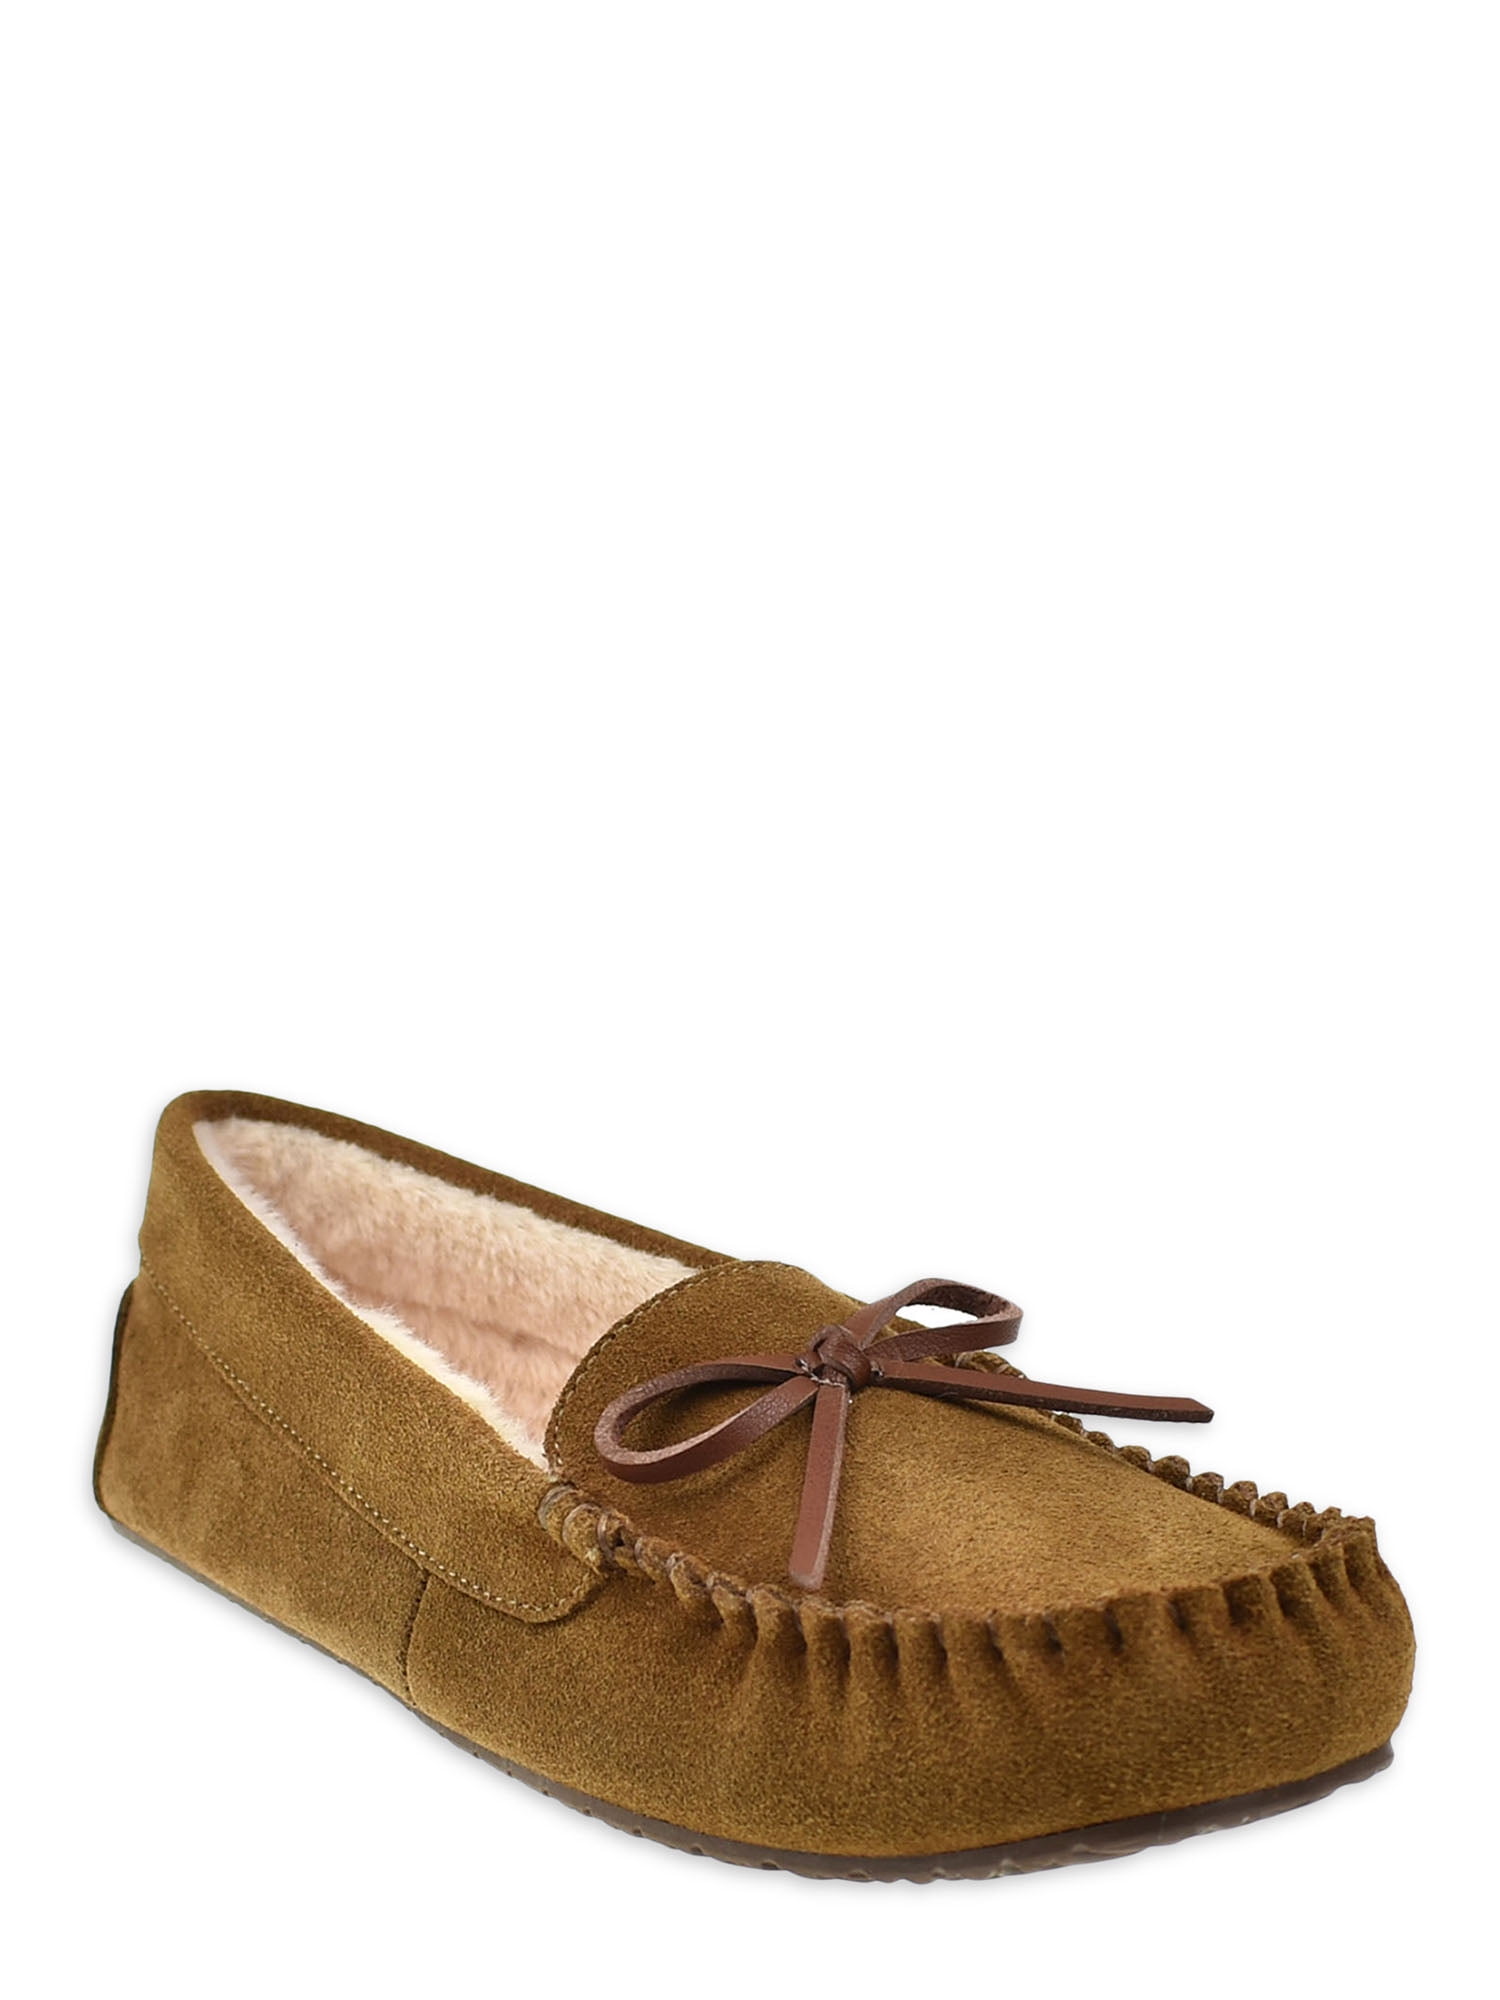 Secret Treasures Moccasin Slippers (Women's) (Wide Width Available ...